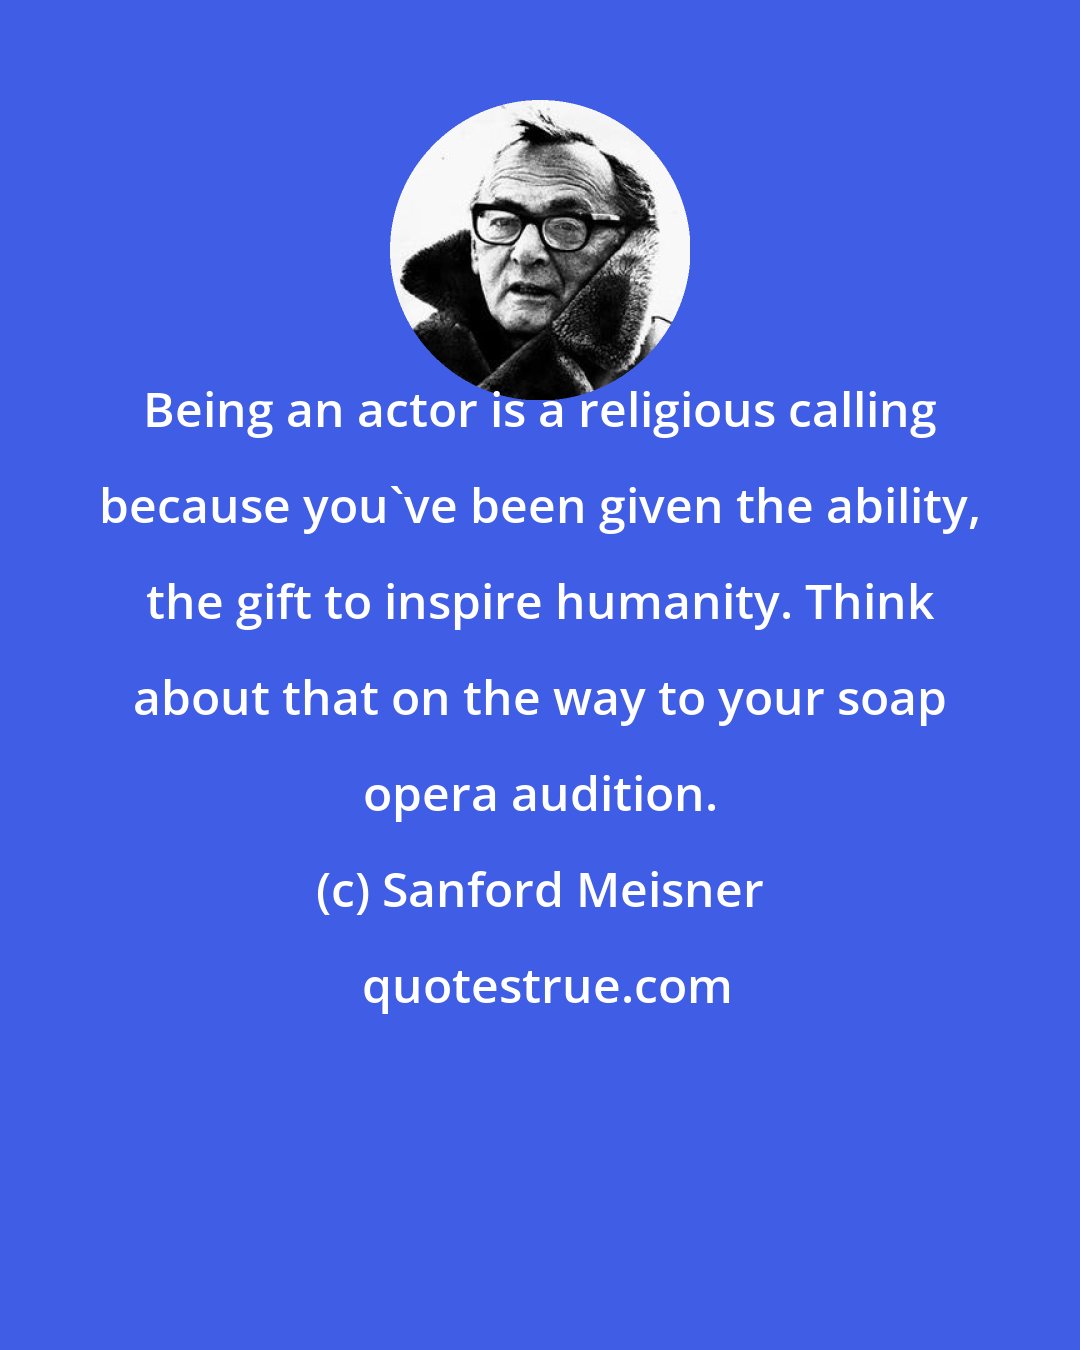 Sanford Meisner: Being an actor is a religious calling because you've been given the ability, the gift to inspire humanity. Think about that on the way to your soap opera audition.